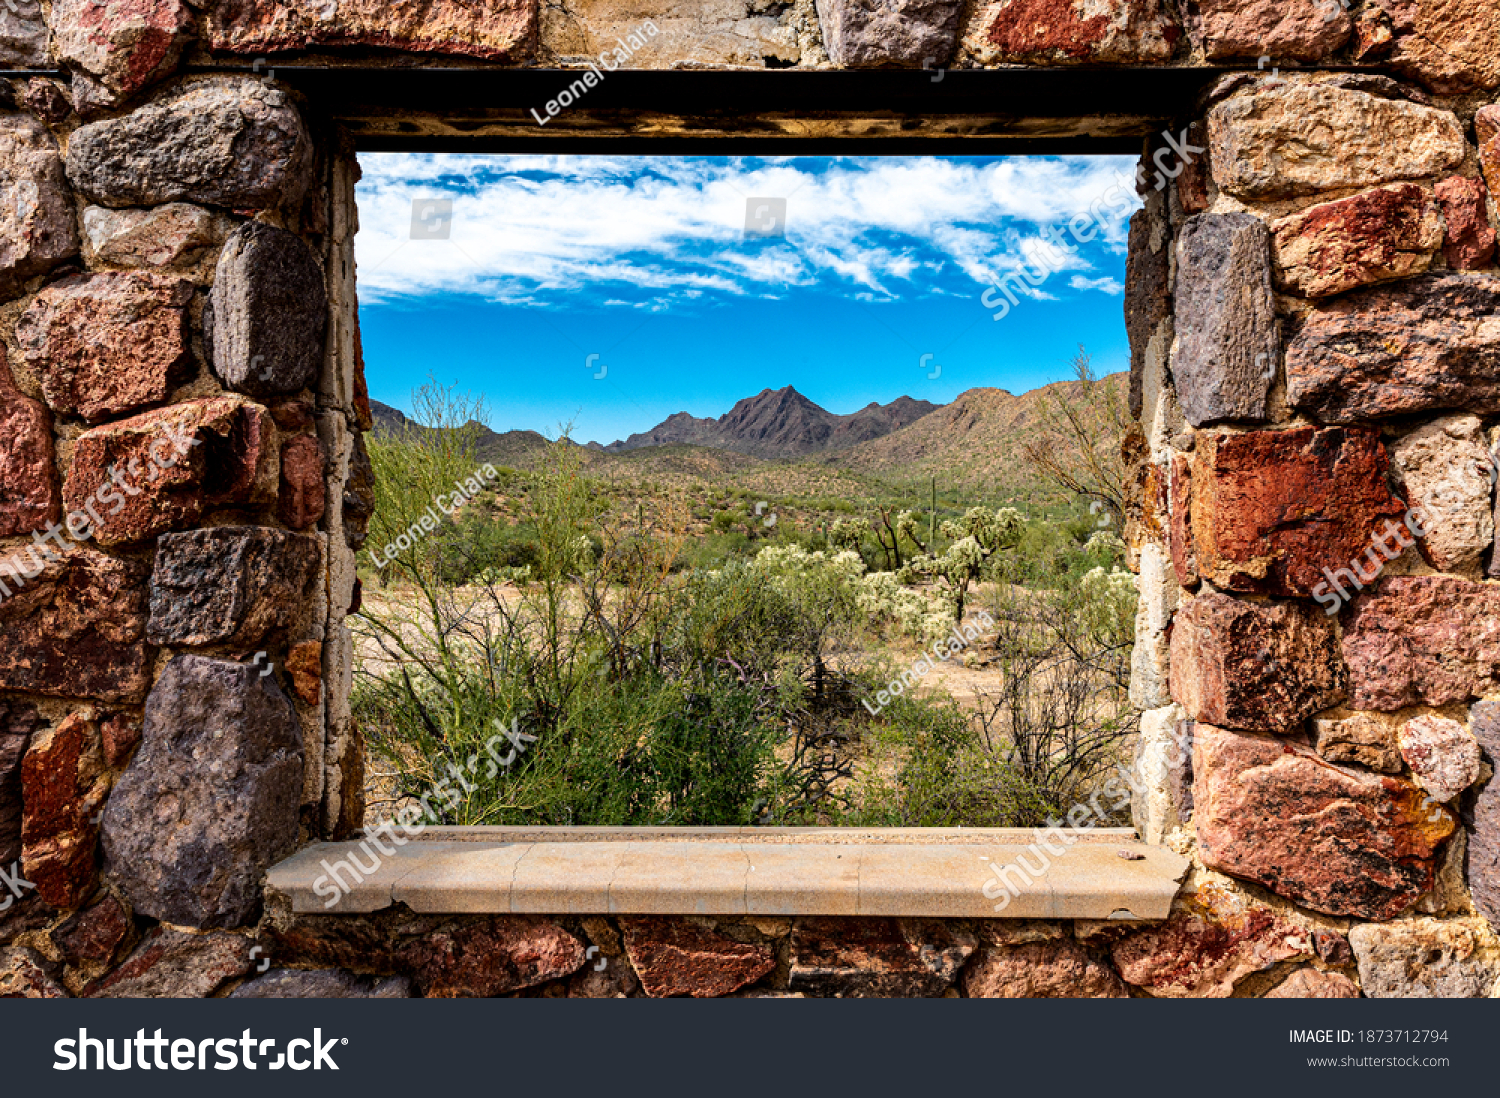 Looking through the window at the picturesque desert landscape from the ruins of a stone house on the Bowen Trail in Tucson Arizona. #1873712794